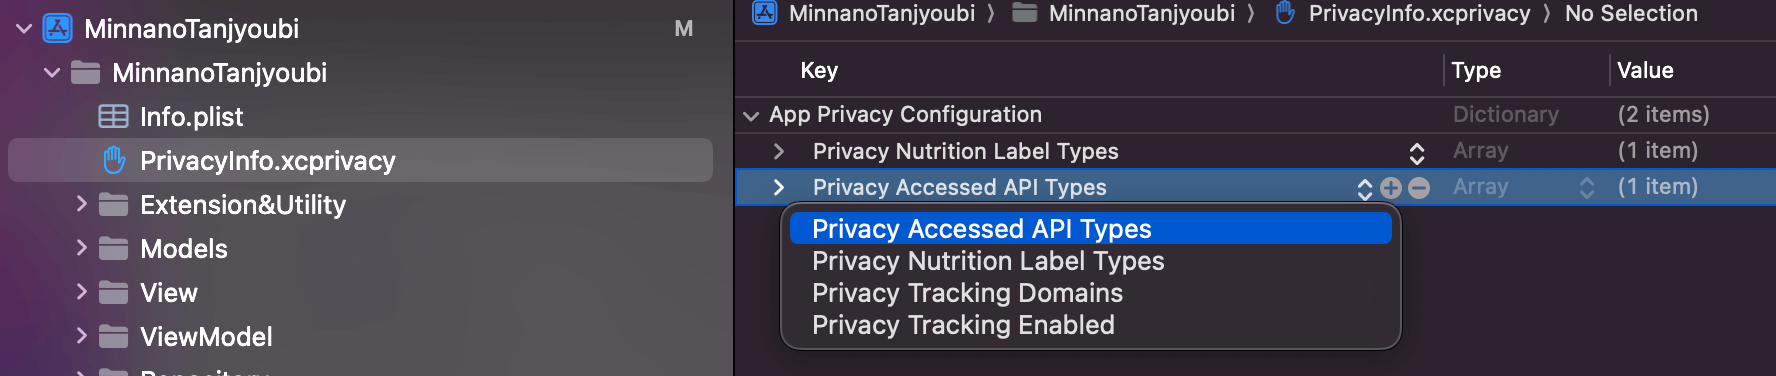 【Xcode/iOS】Privacy Manifestsに対応する方法！PrivacyInfo.xcprivacyとは